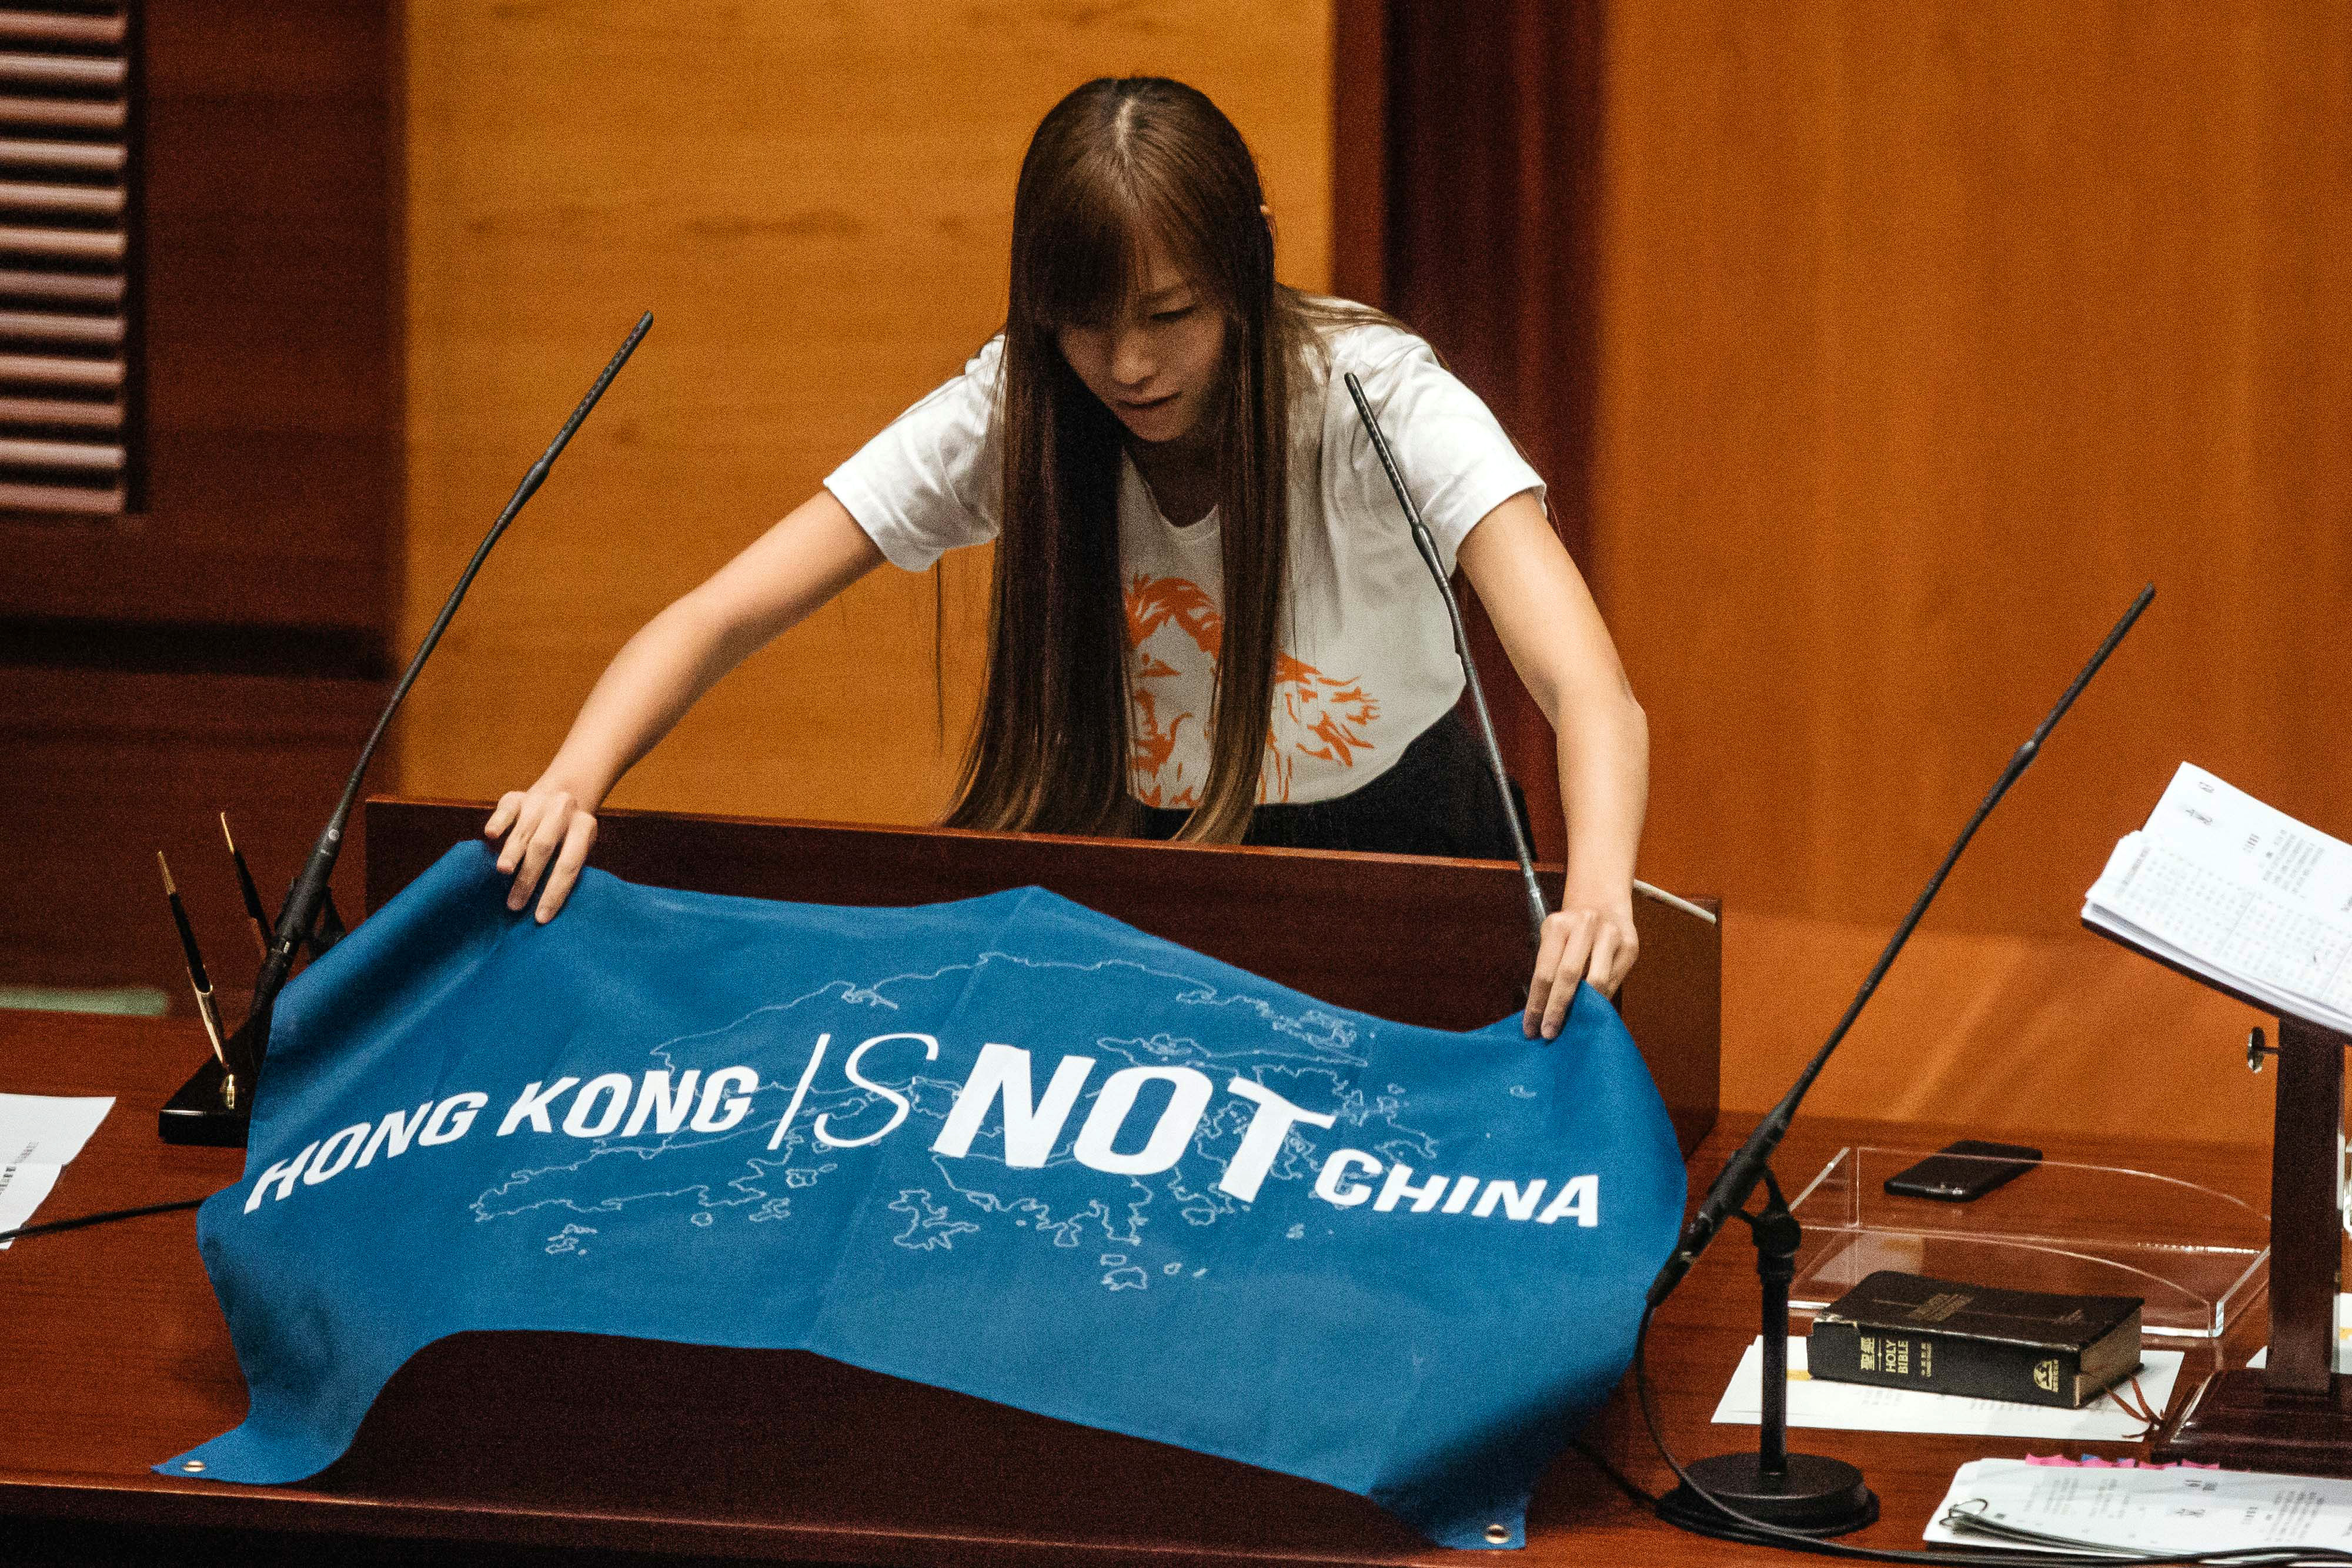 Yau Wai-ching, an incoming lawmaker and member of Youngspiration, unfurls a banner that reads "Hong Kong Is Not China" in the chamber of the Legislative Council in Hong Kong on Oct. 12, 2016 (Anthony Kwan—Bloomberg/Getty Images)